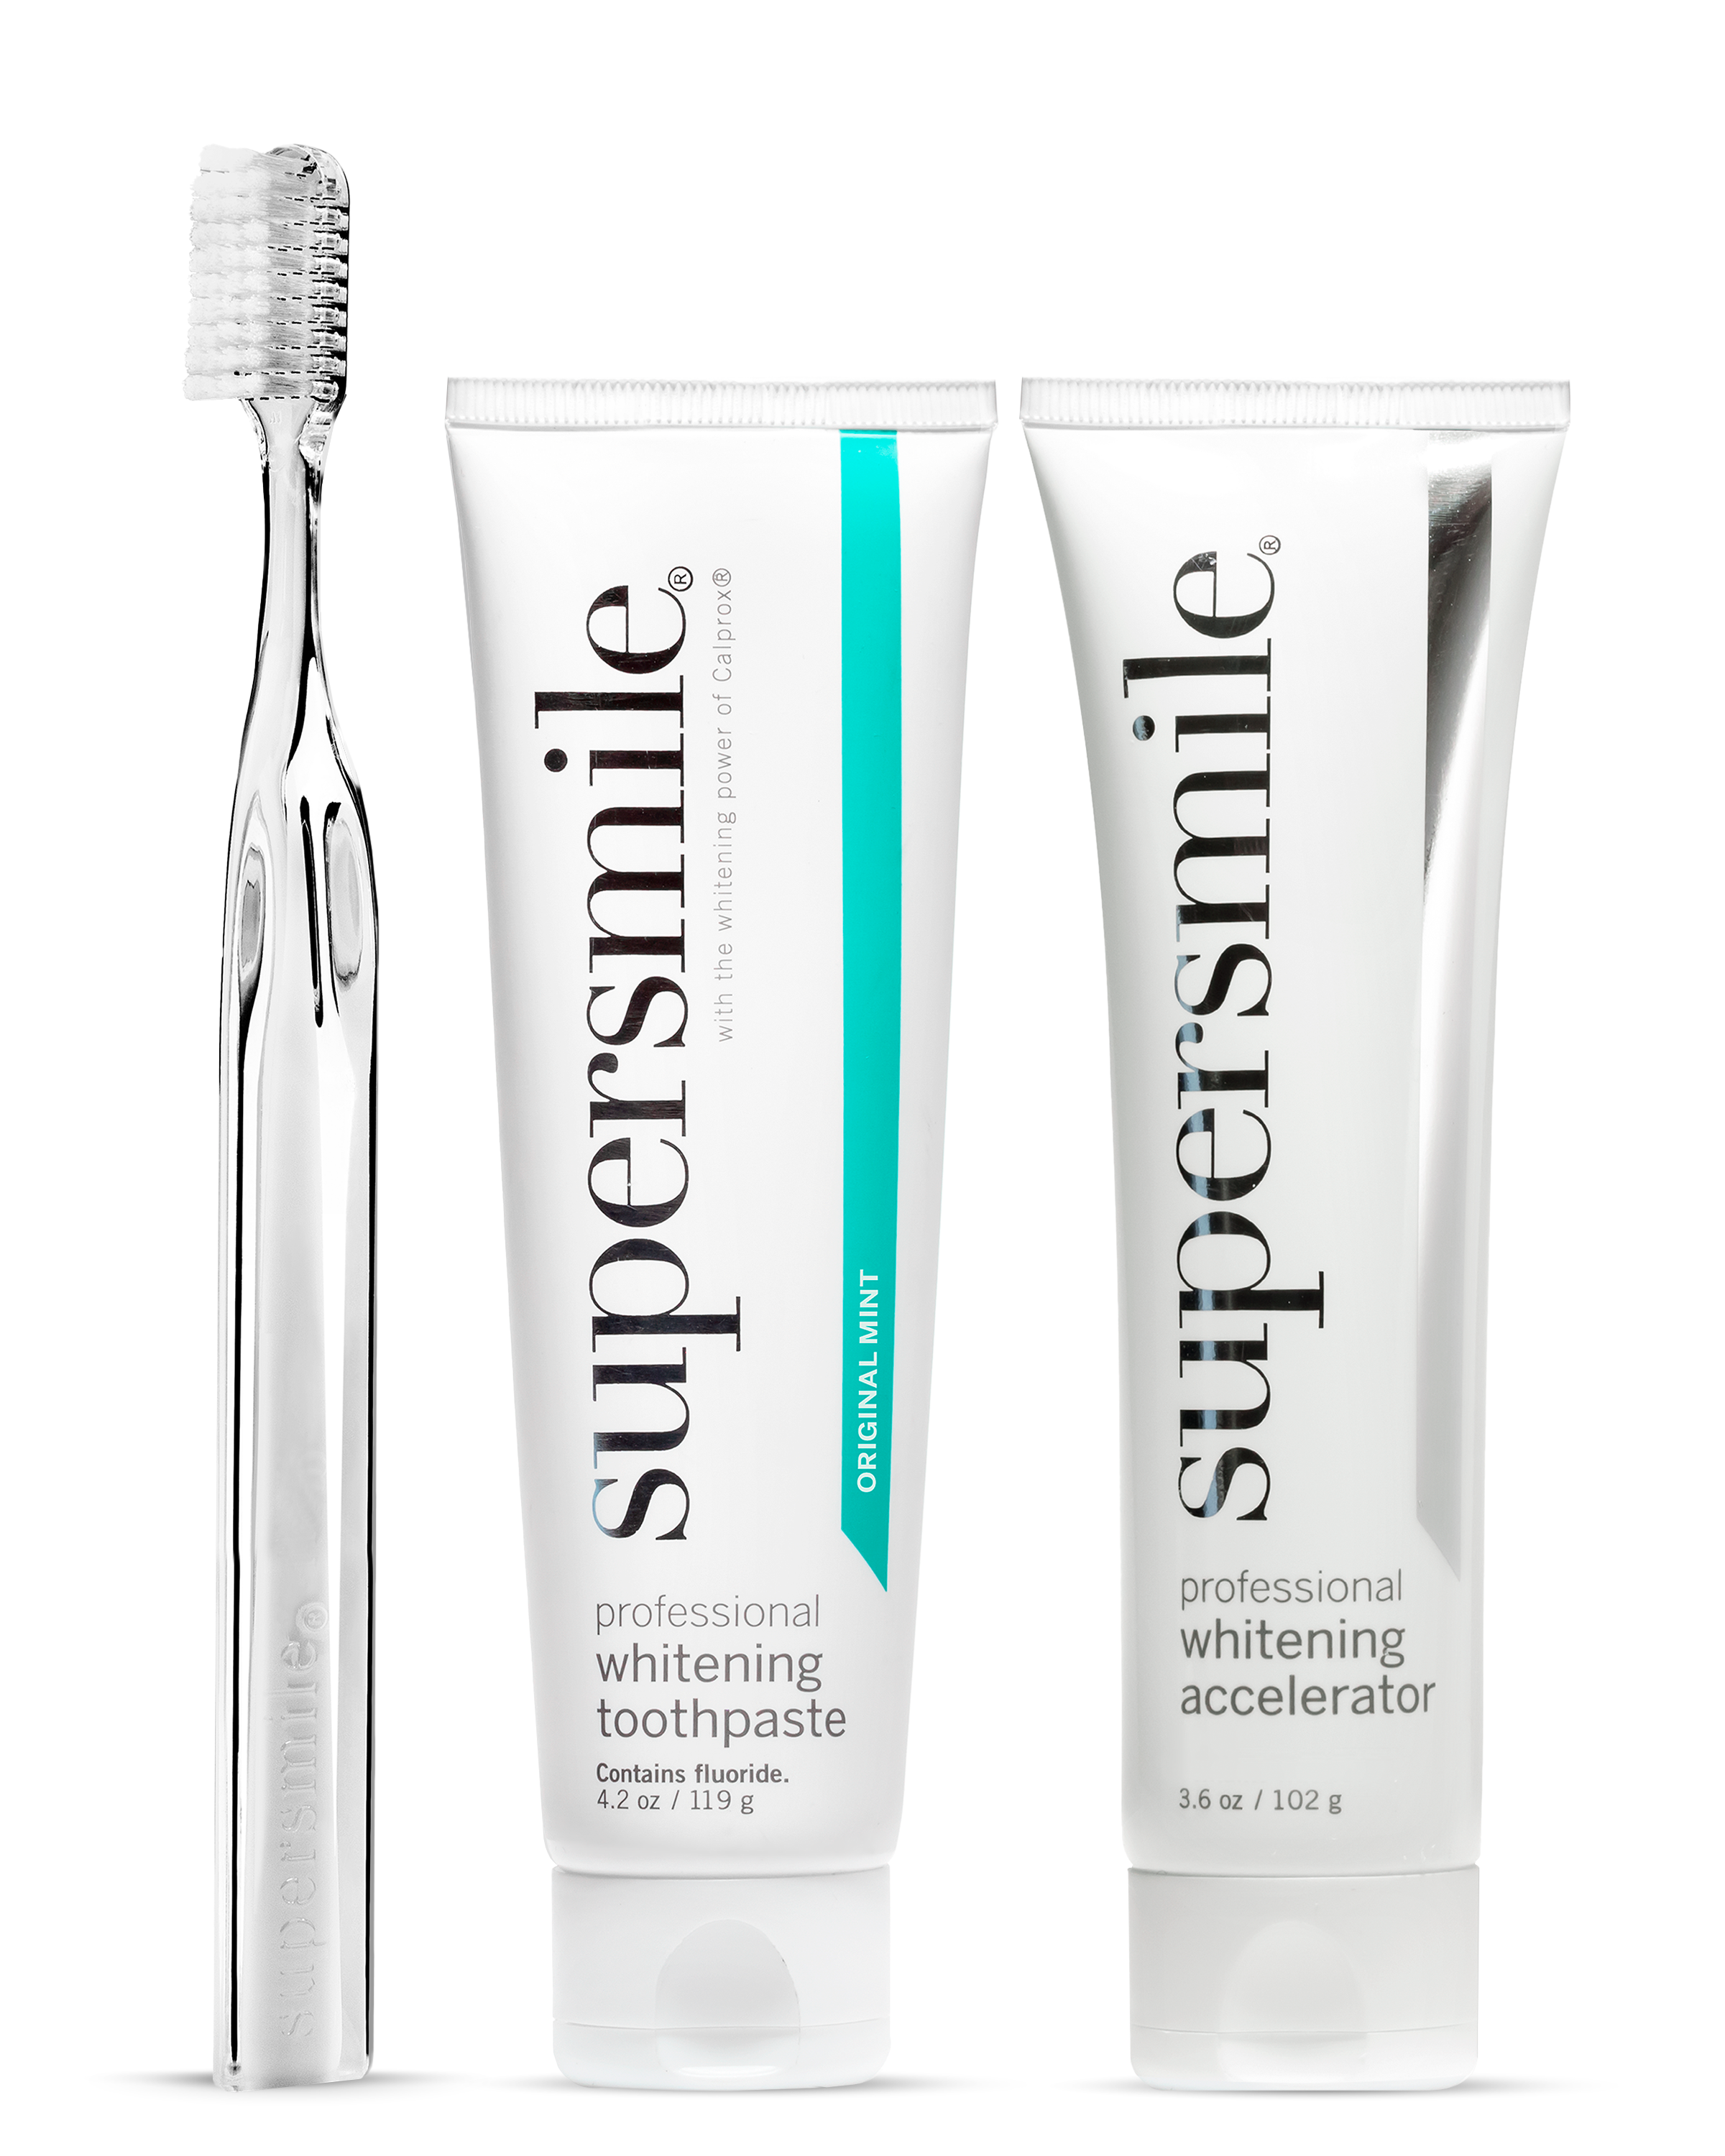 Ultimate Teeth Whitening Set- Original Toothpaste, Accelerator, and White 45 Degree Crystal Toothbrush